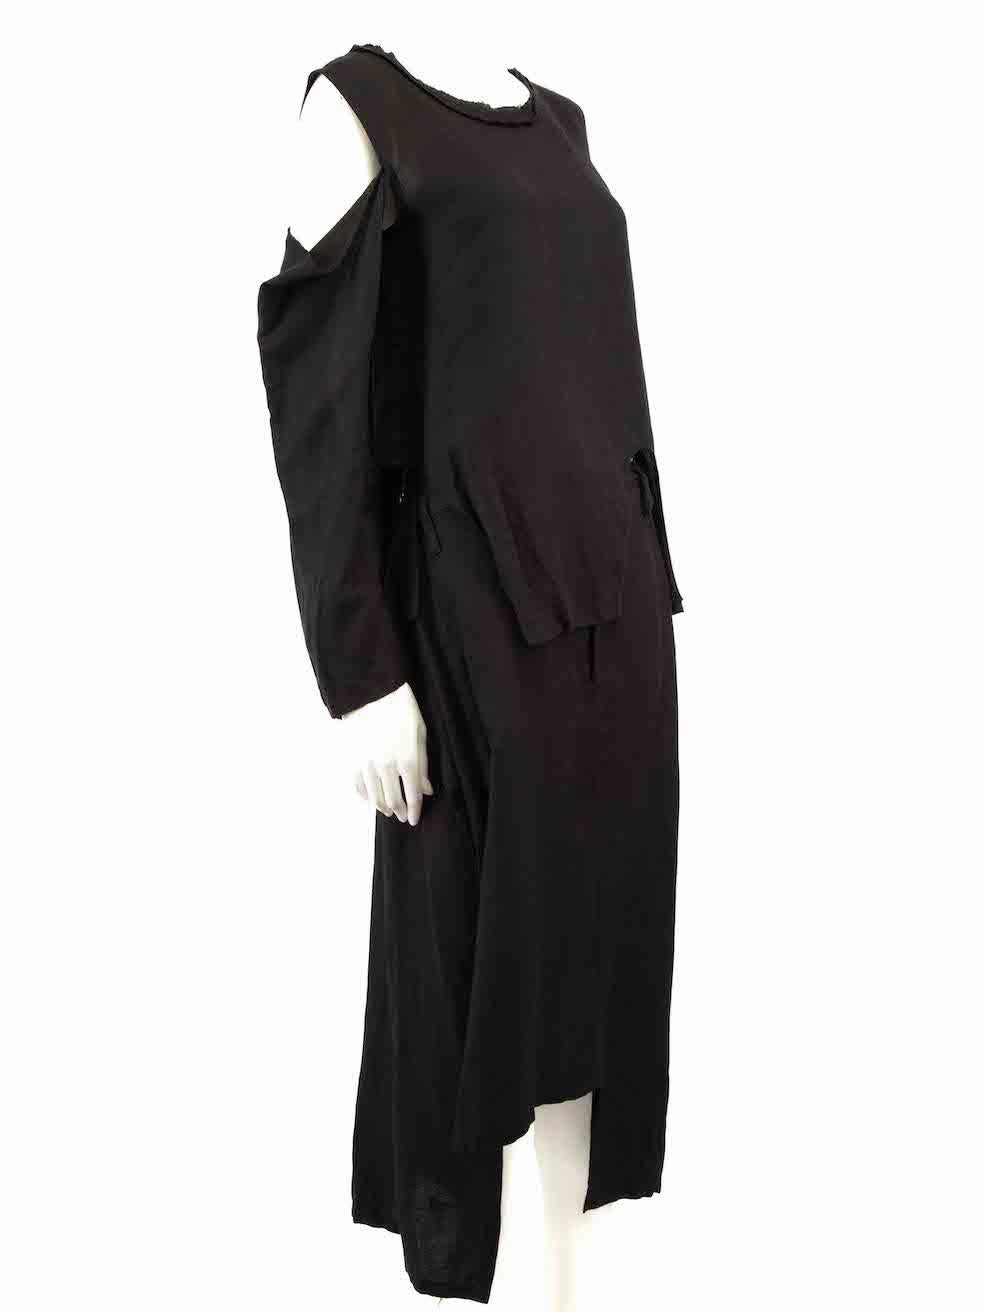 CONDITION is Very good. Hardly any visible wear to set is evident on this used Yohji Yamamoto designer resale item.
 
 
 
 Details
 
 
 Black
 
 Linen
 
 Top and skirt set
 
 Asymmetric hems
 
 Long sleeve top
 
 Side zip fastening
 
 Round neck
 
